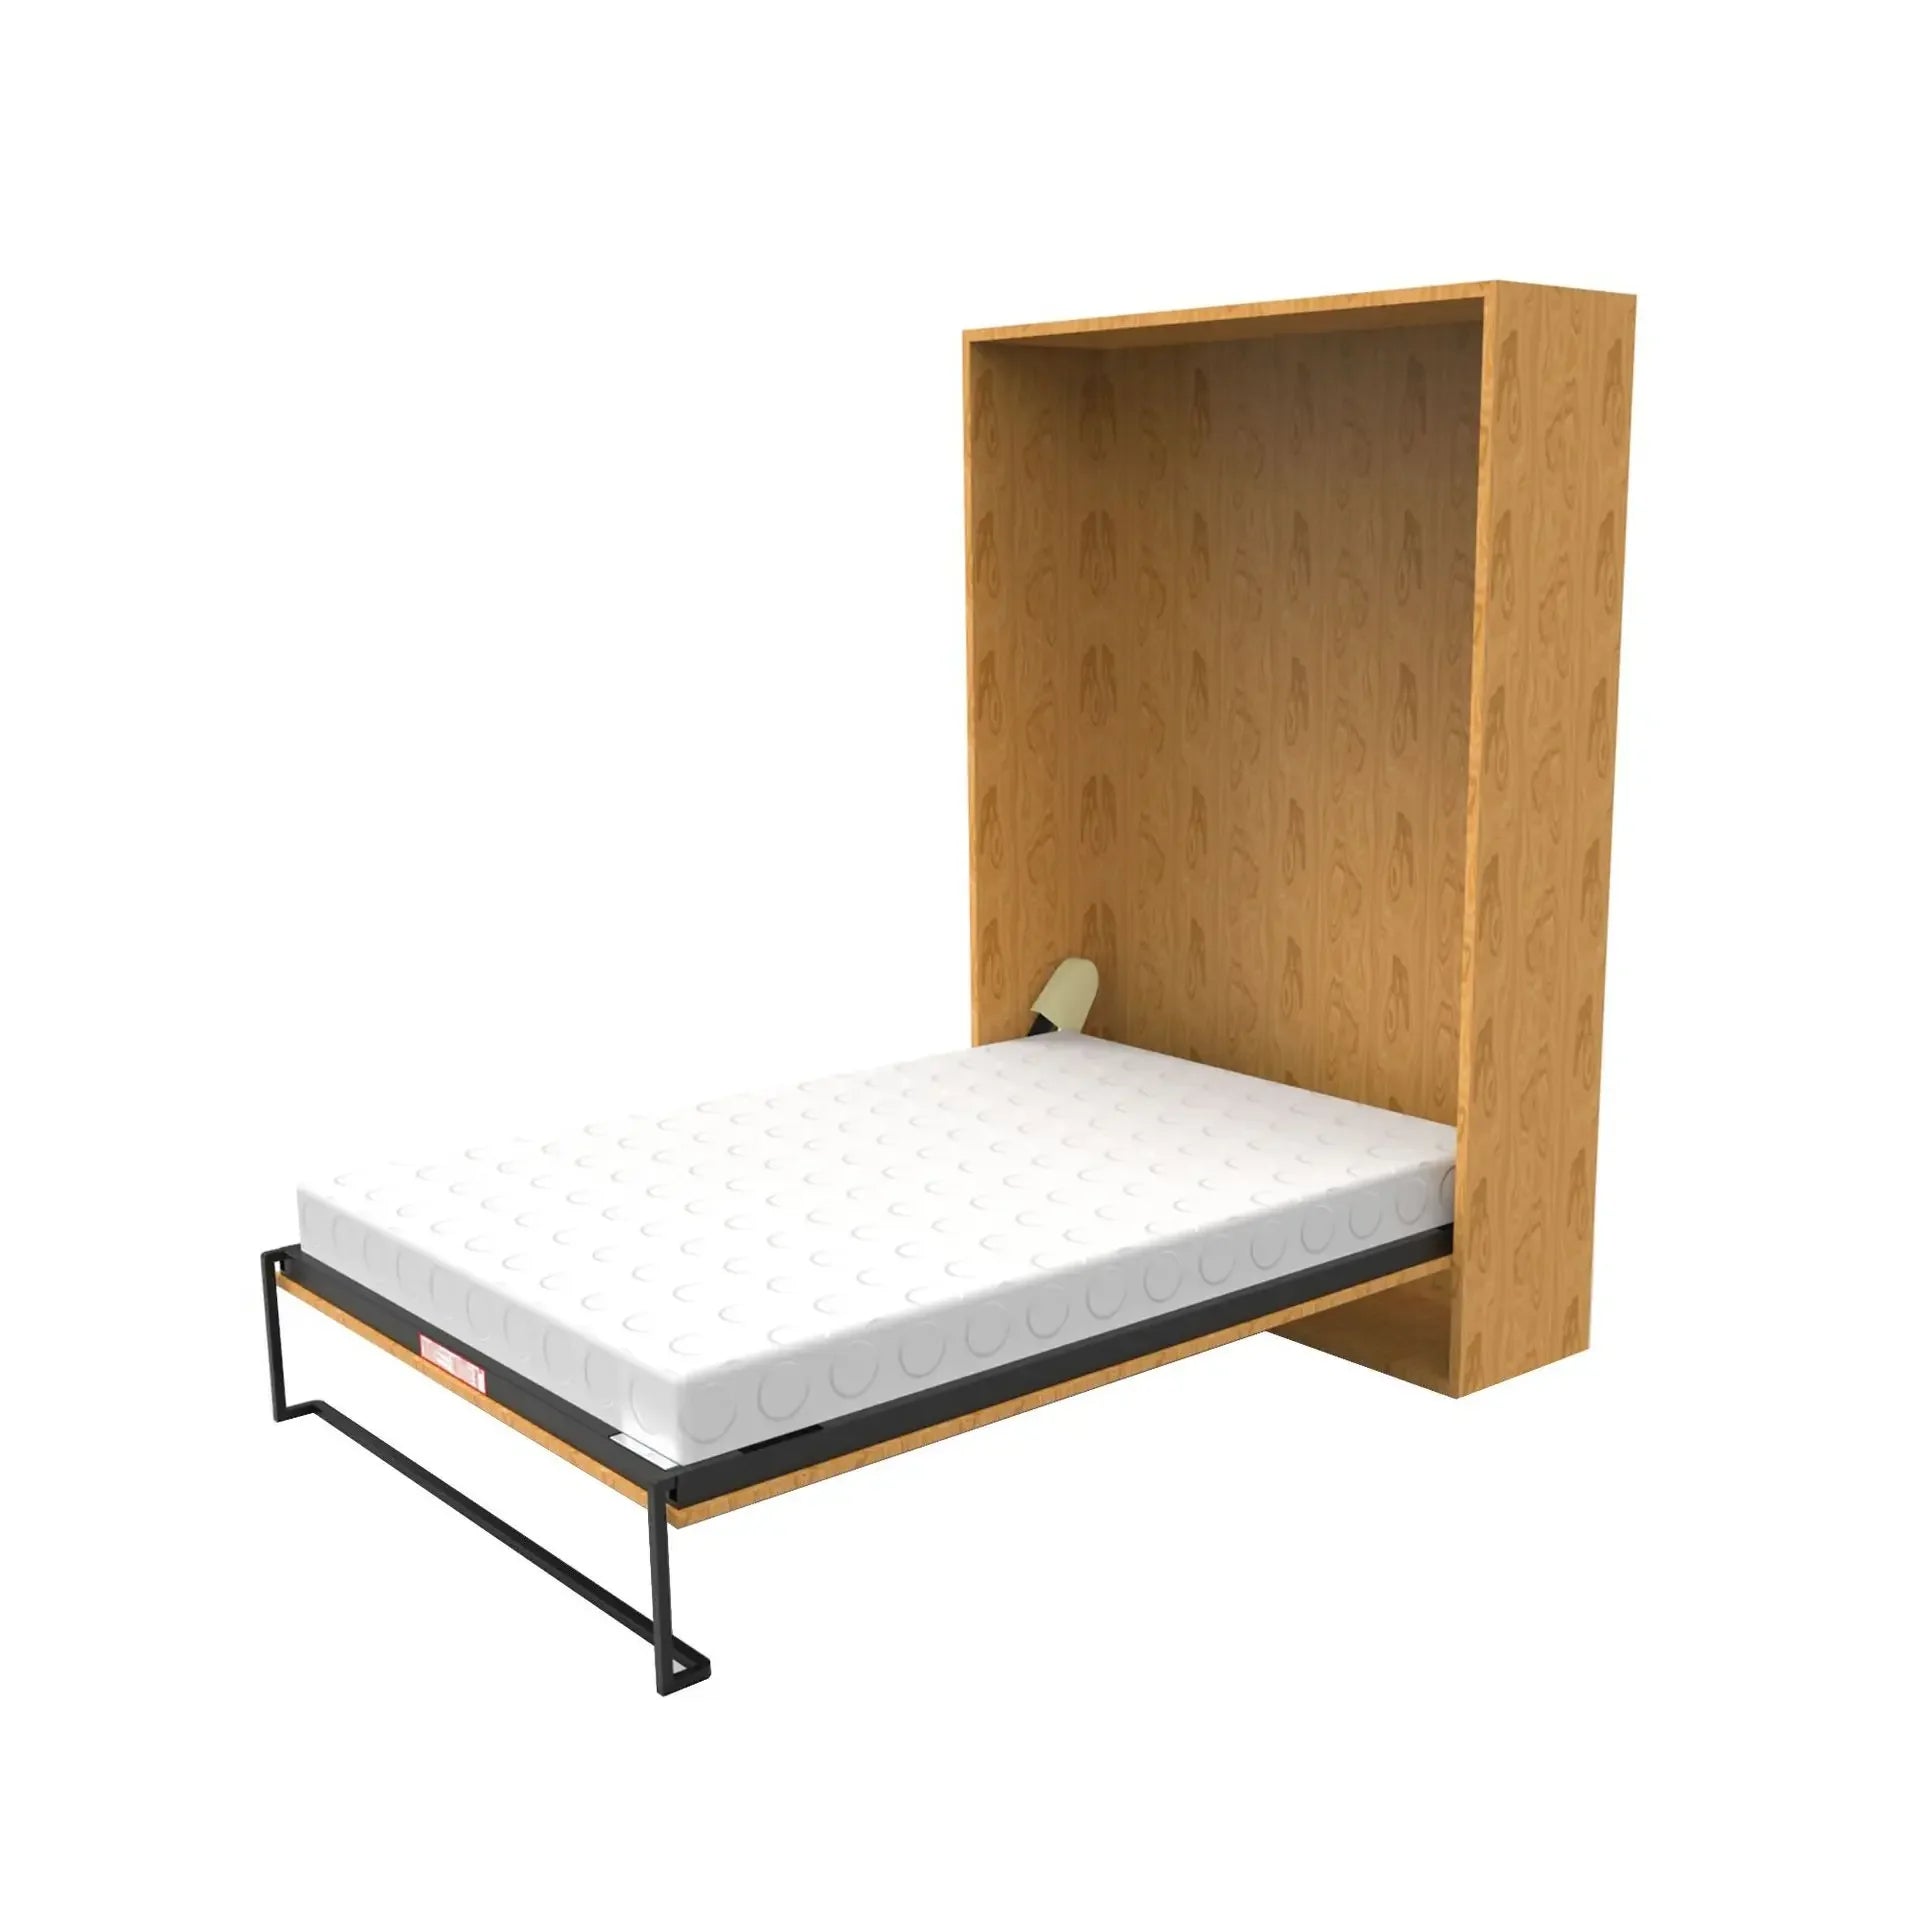 Invisible ed hardware accessories electric wall bed folding bed flip bed Murphy be accessories automatic invisible bd frame